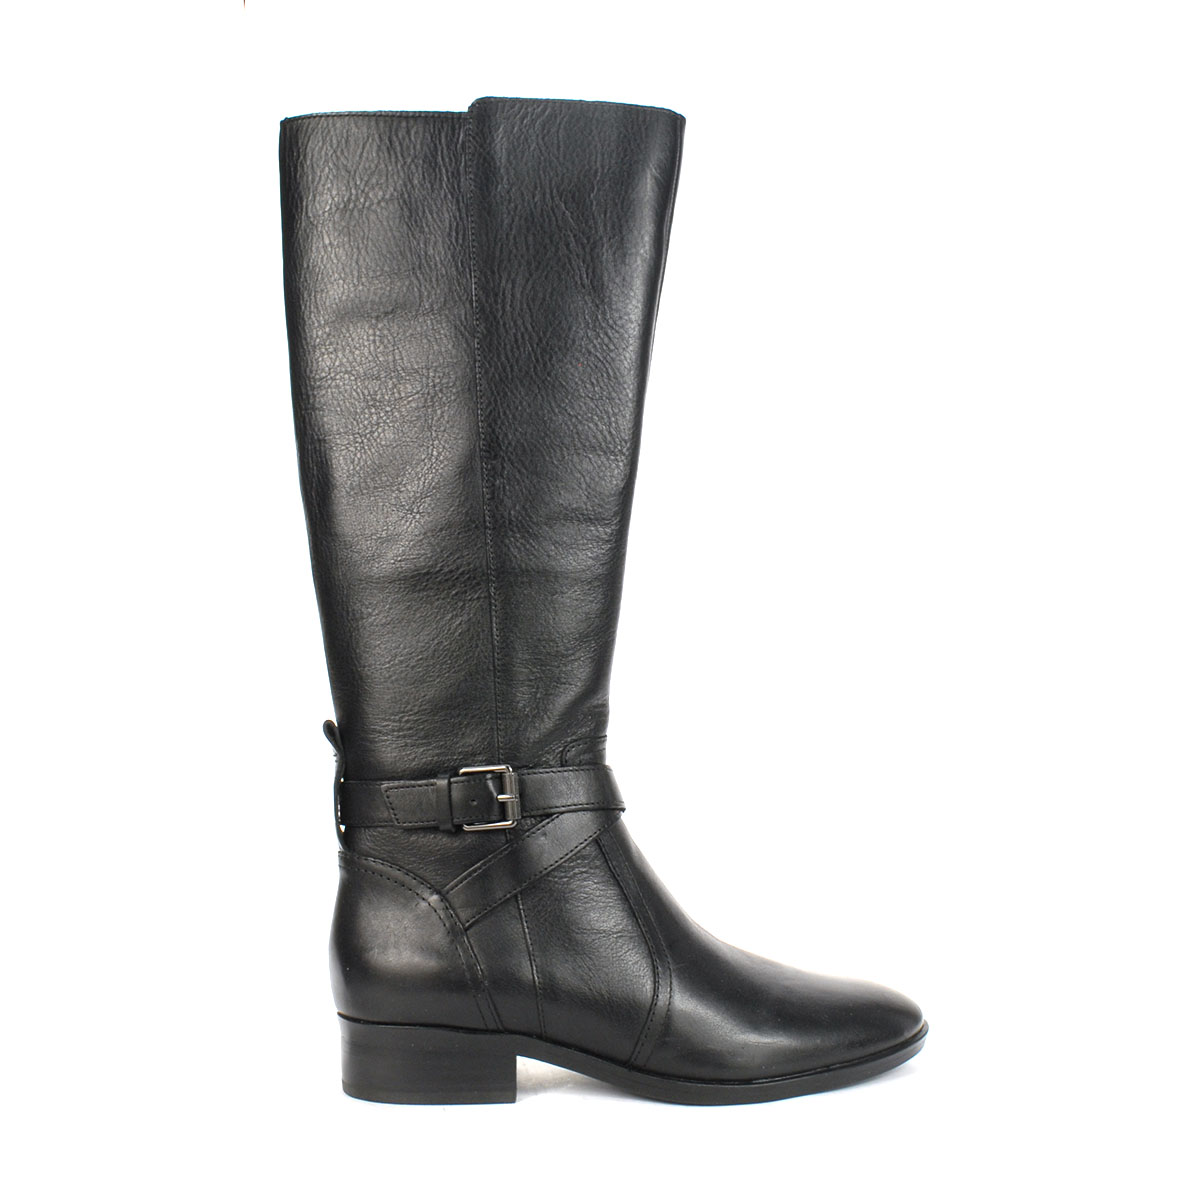 Naturalizer Rena Tall Wide Calf Black leather Boots